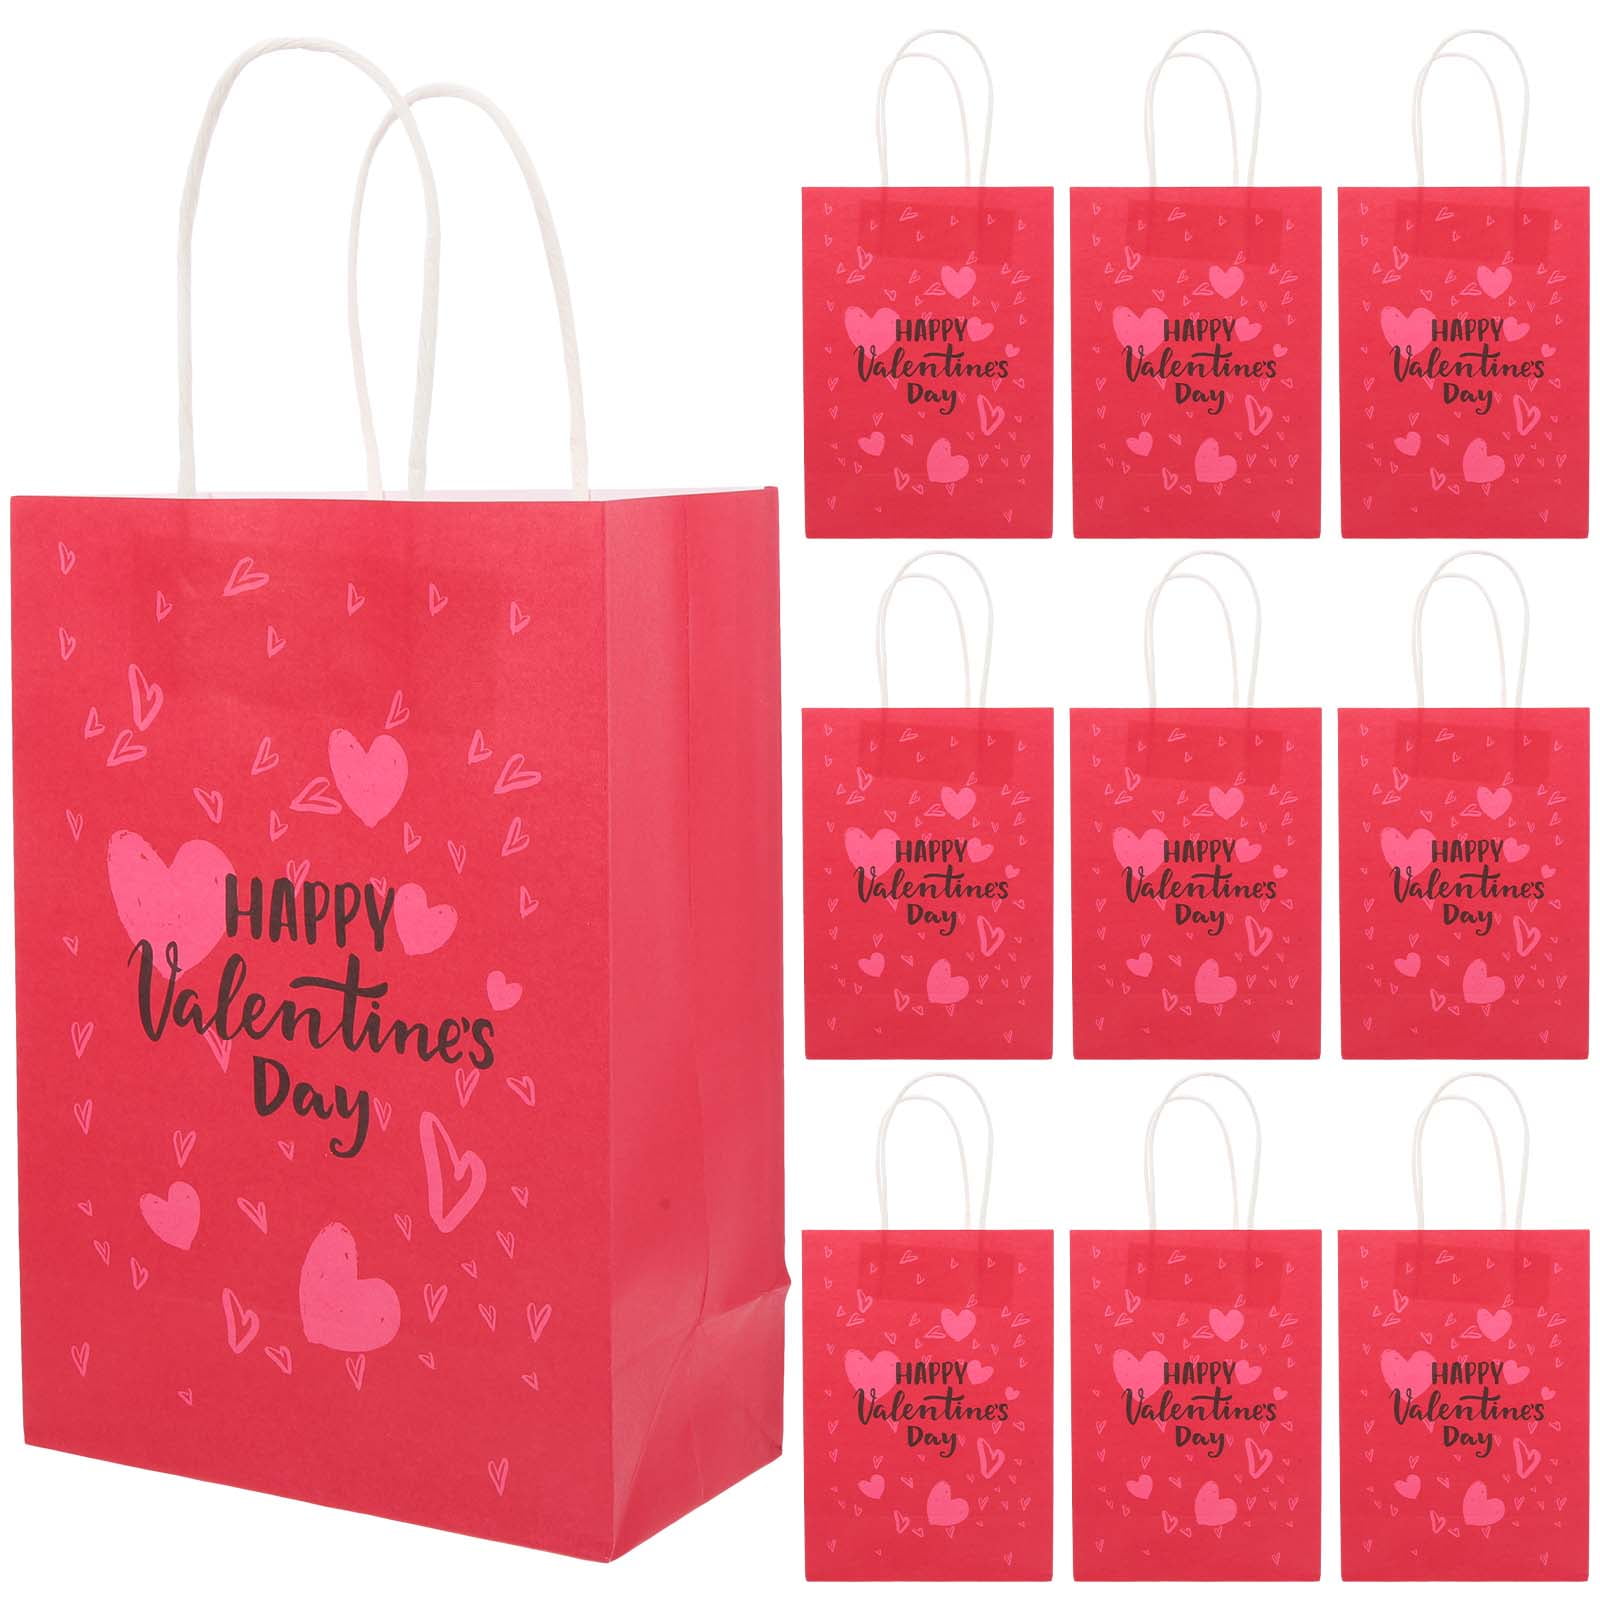 10pcs Valentine's Day Paper Wrapping Bag Gift Bags Decorative Heart ...